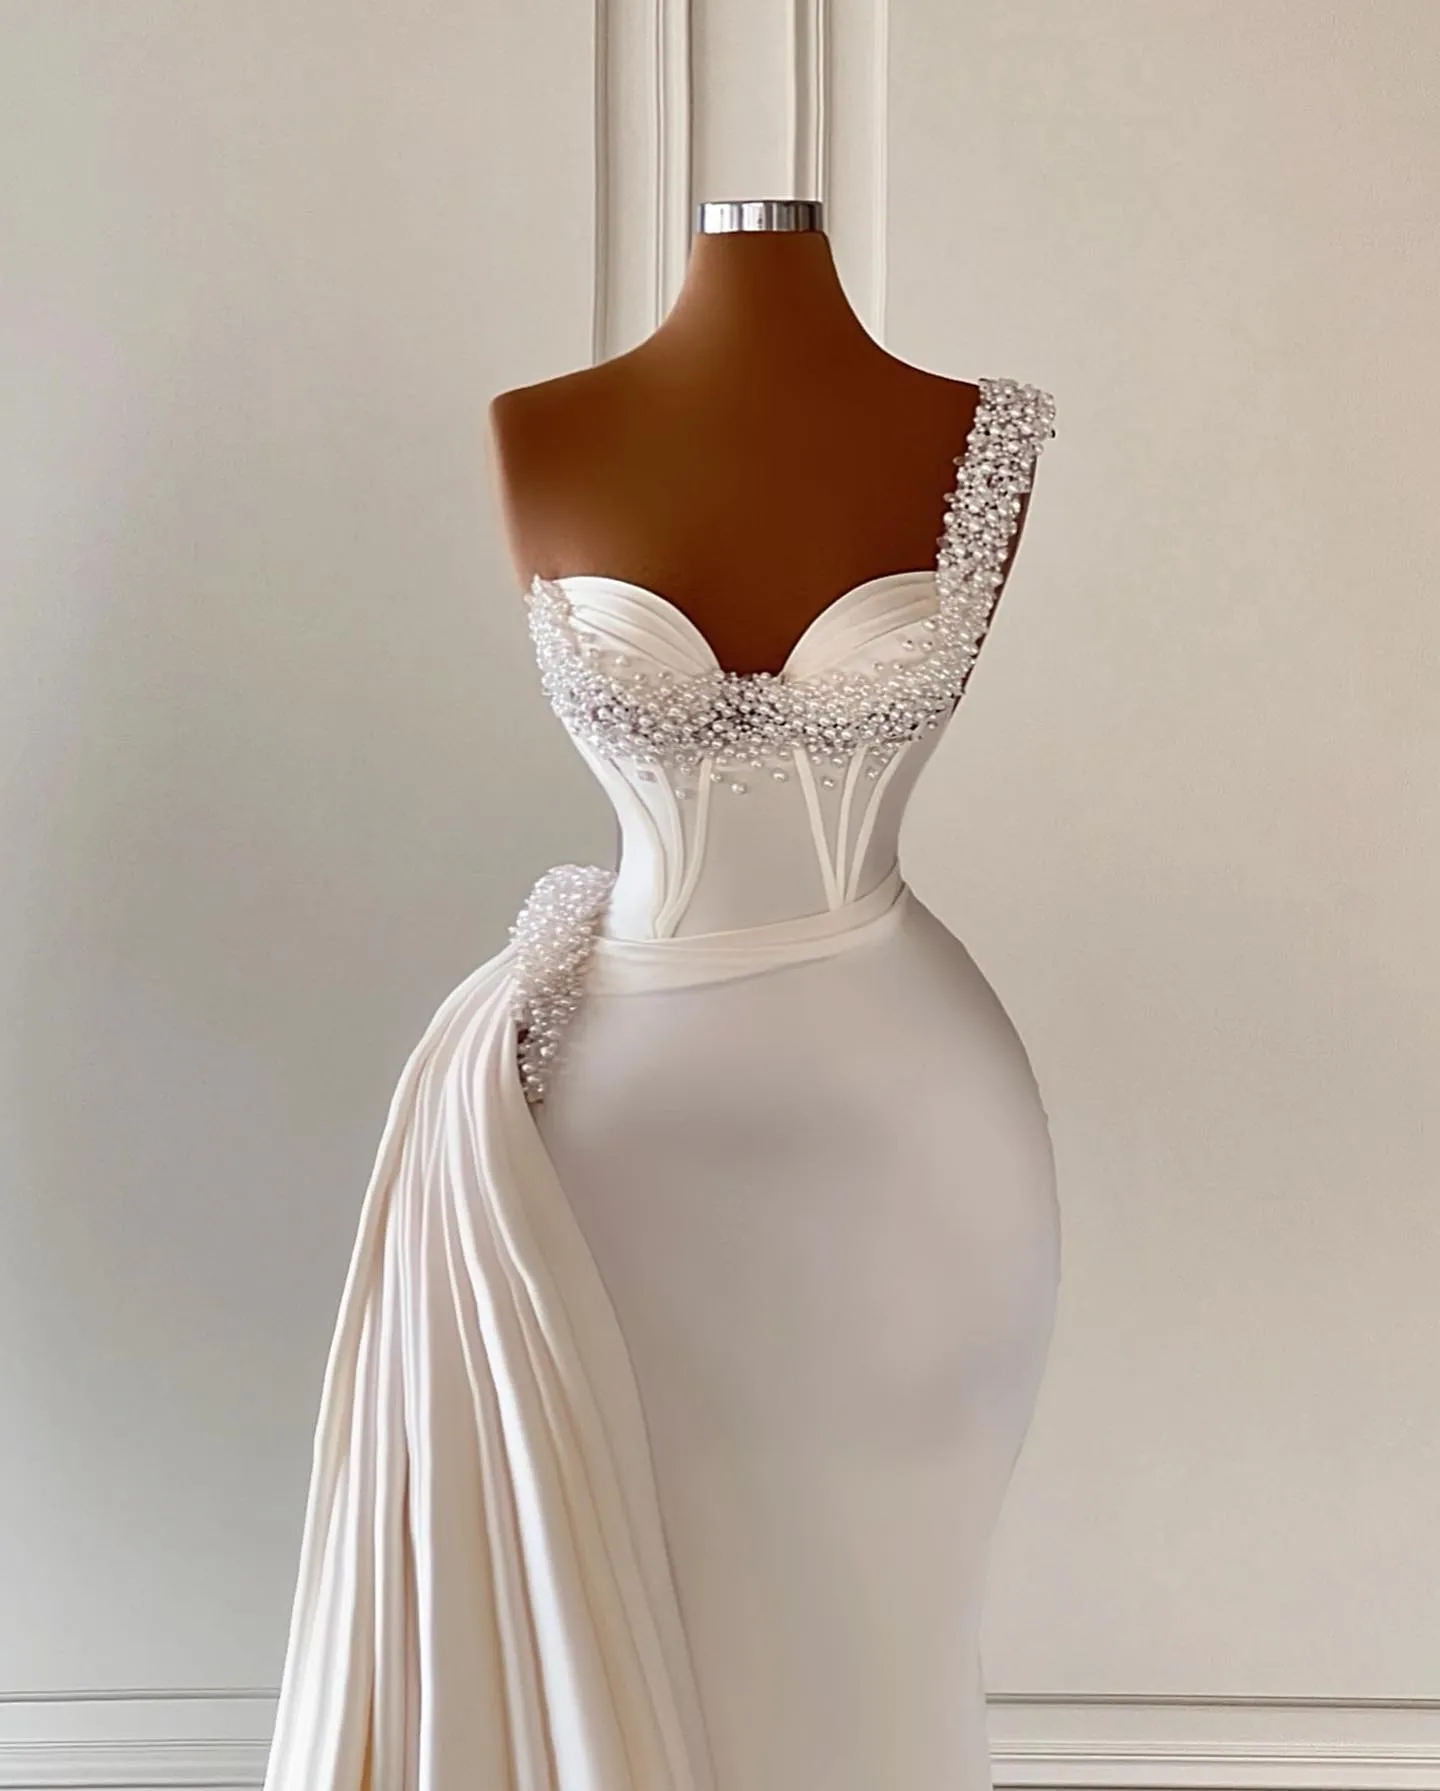 Luxury New Arrival Evening Dresses Sweetheart One Shoulder Sleeveless Lace Floor Length Beaded Pearls Satin Sequins Appliques Prom Dress Formal Plus Size Tailored